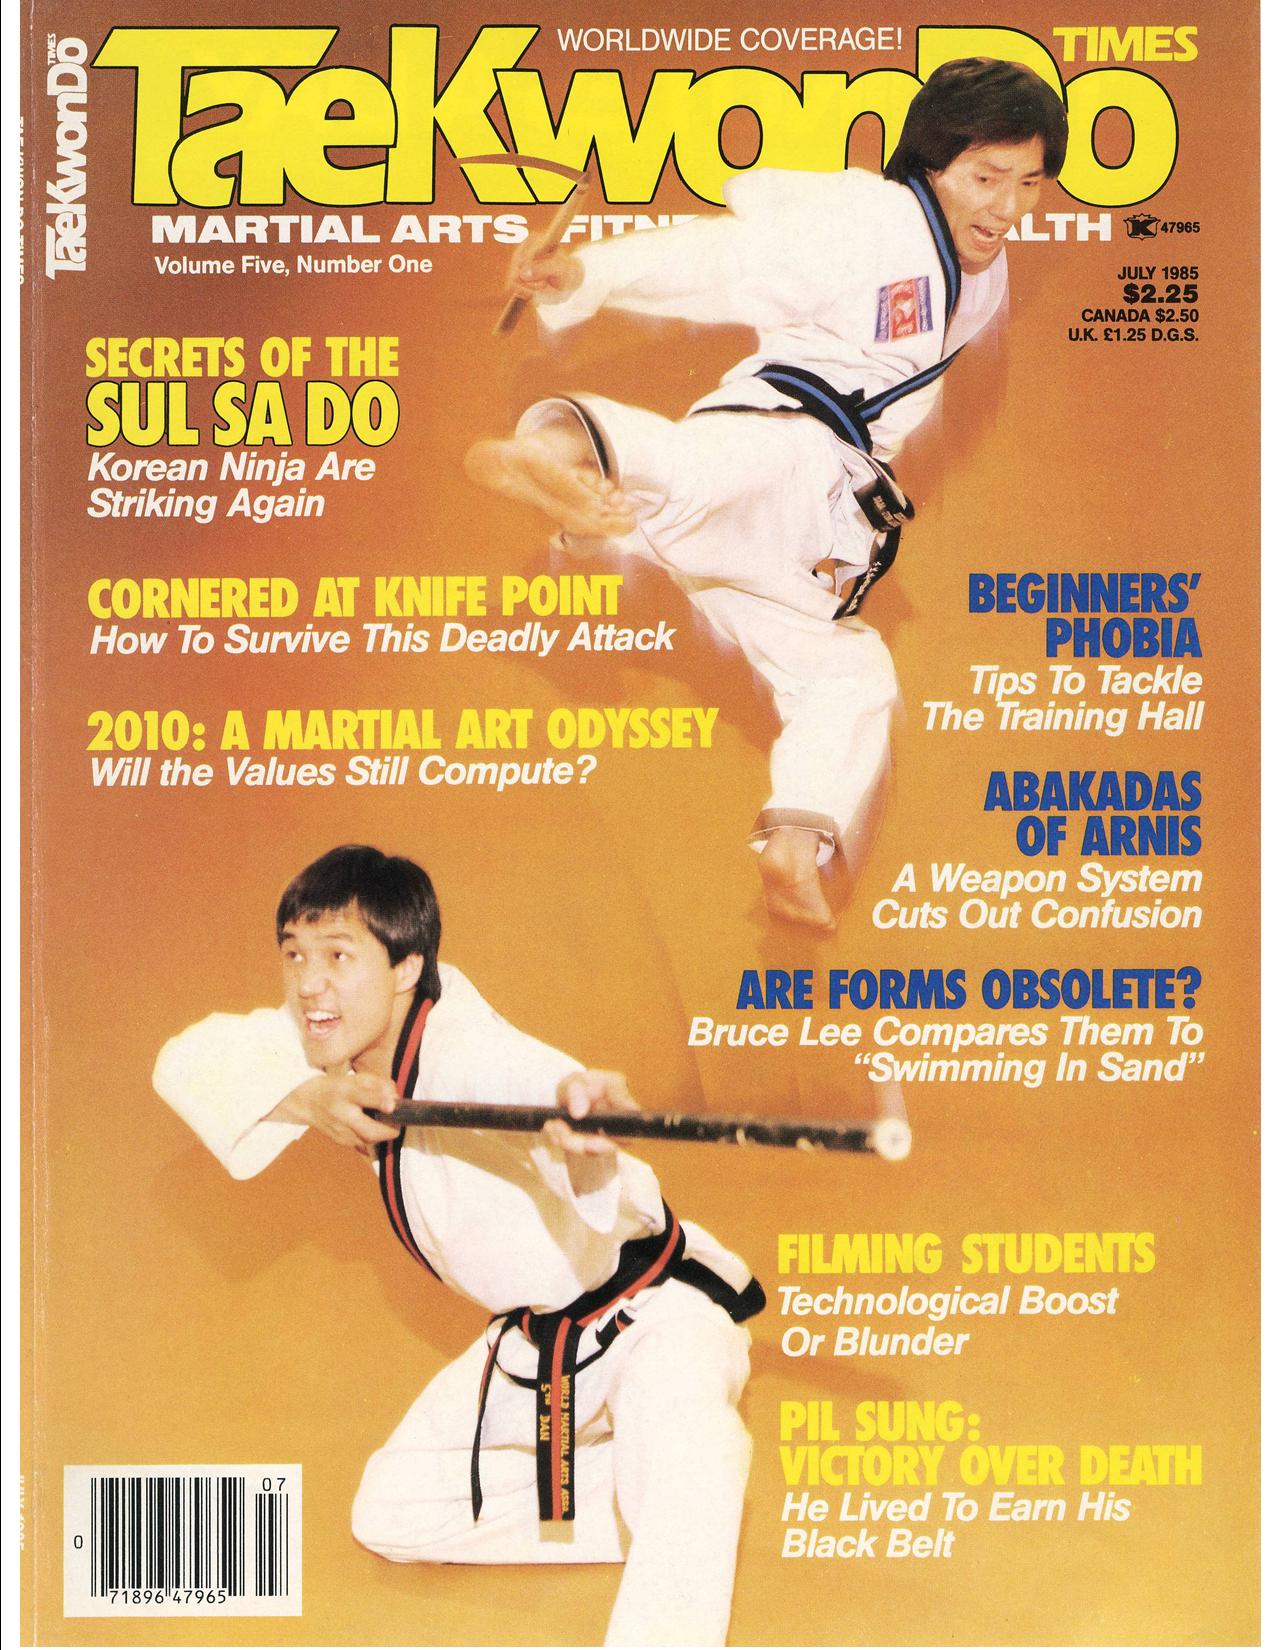 Julian Lee jumps into action for Taekwondo Times cover story